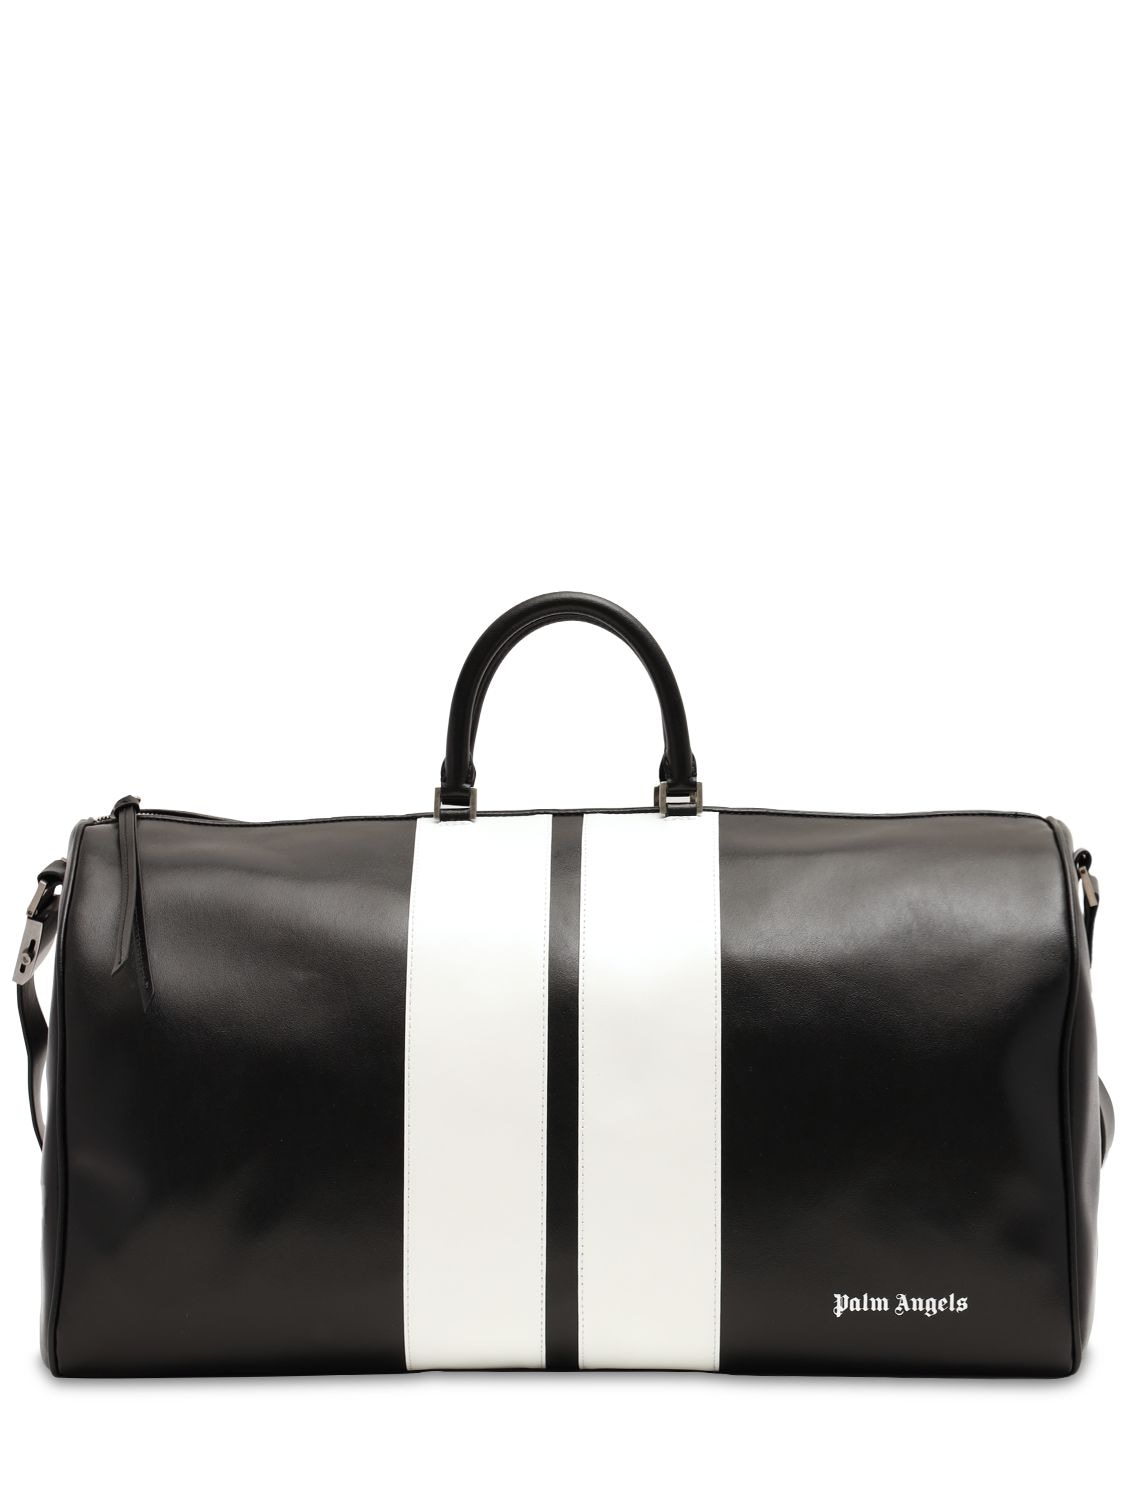 PALM ANGELS Classic Leather Track Travel Bag